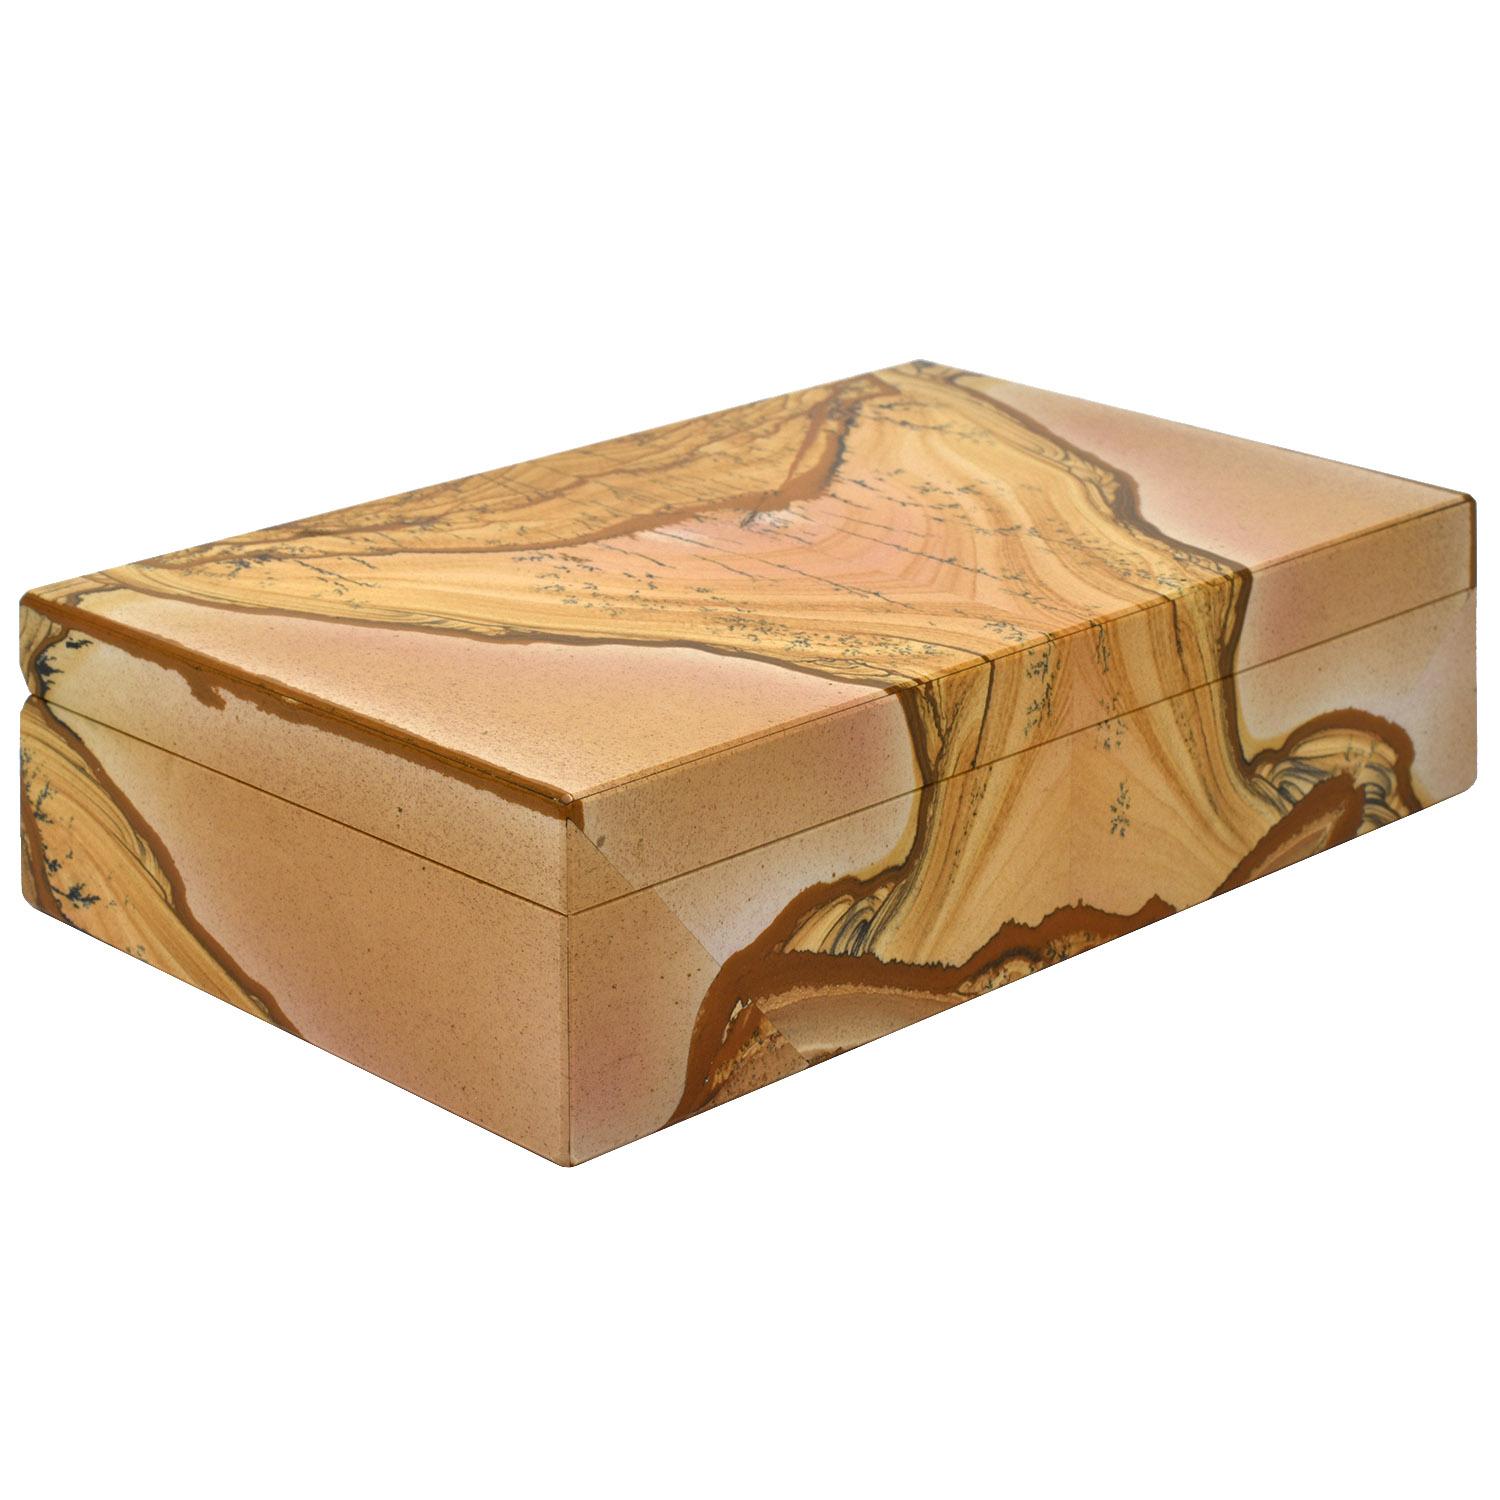 Italian Florentine marble Pietra Paesina natural stone box with onyx interior

This exquisitely made natural mineral specimen box features Florentine marble which is a rare kind of limestone called pieta paesina. The stone falls into the picture